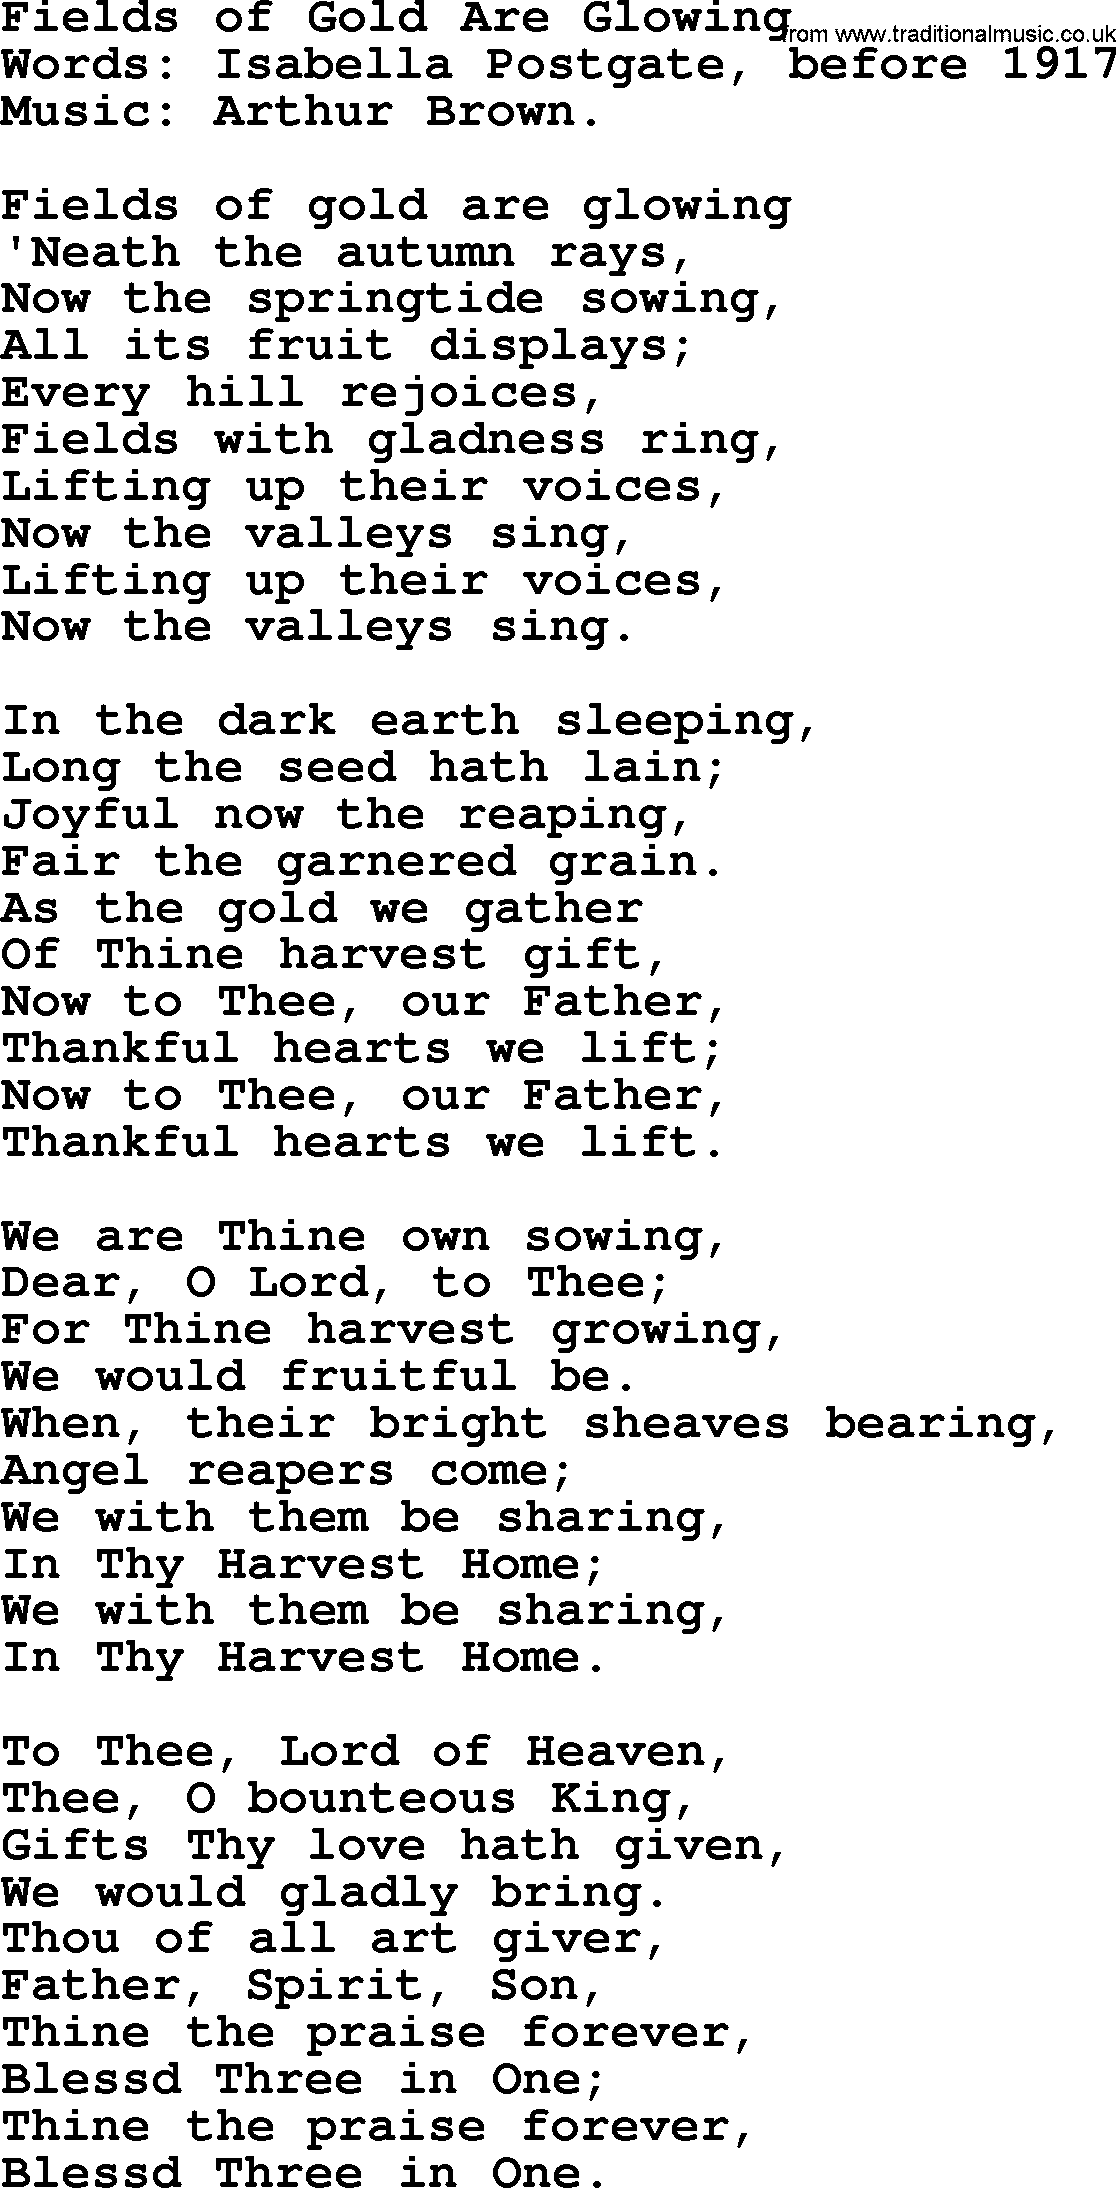 Thanksgiving Hymns and Songs: Fields Of Gold Are Glowing lyrics with PDF